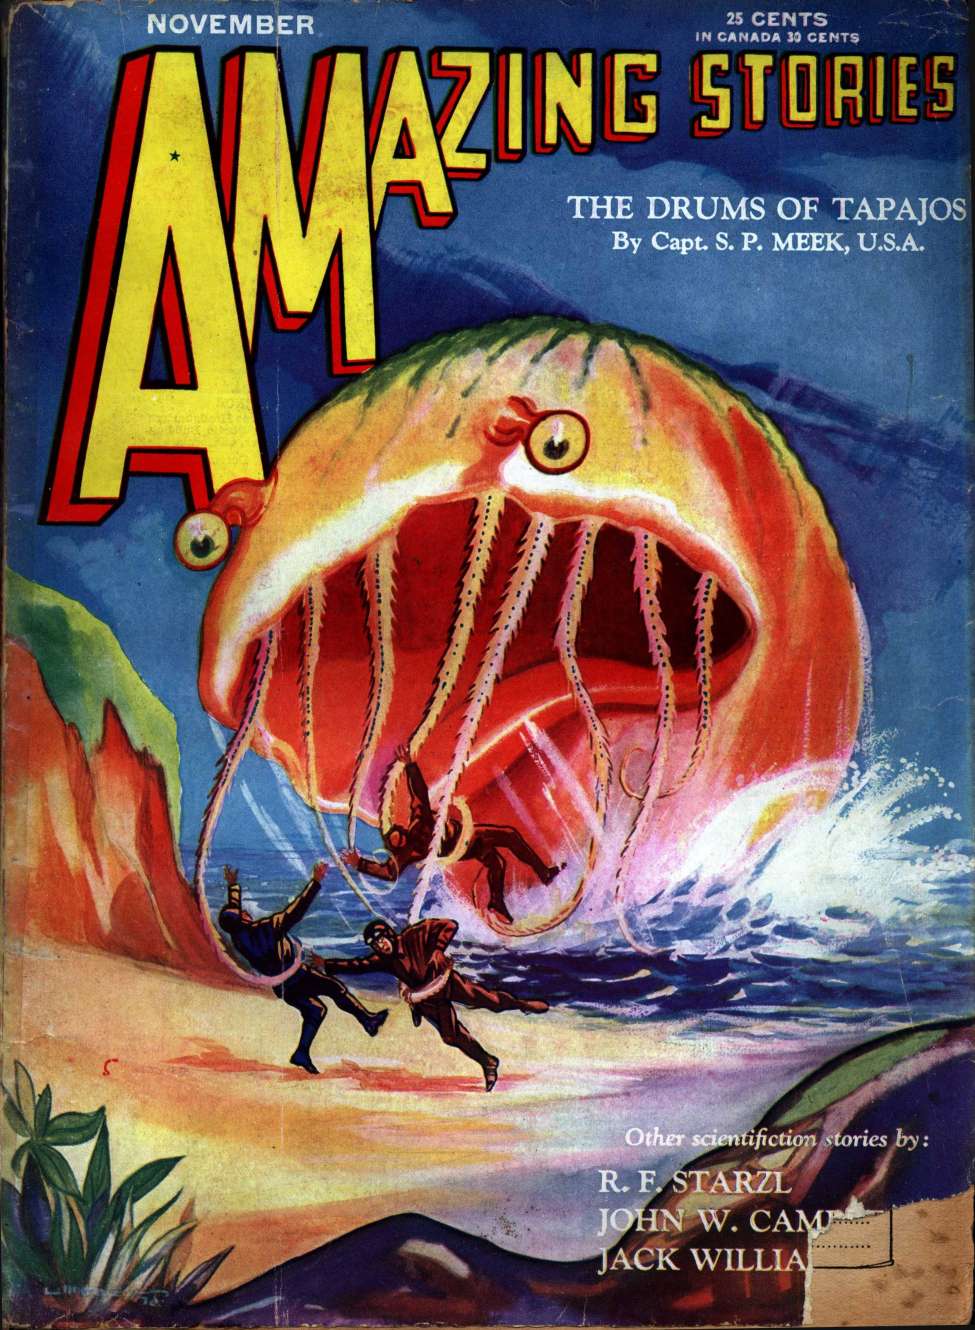 Book Cover For Amazing Stories v5 8 - The Drums of Tapajos - Capt. S. P. Meek